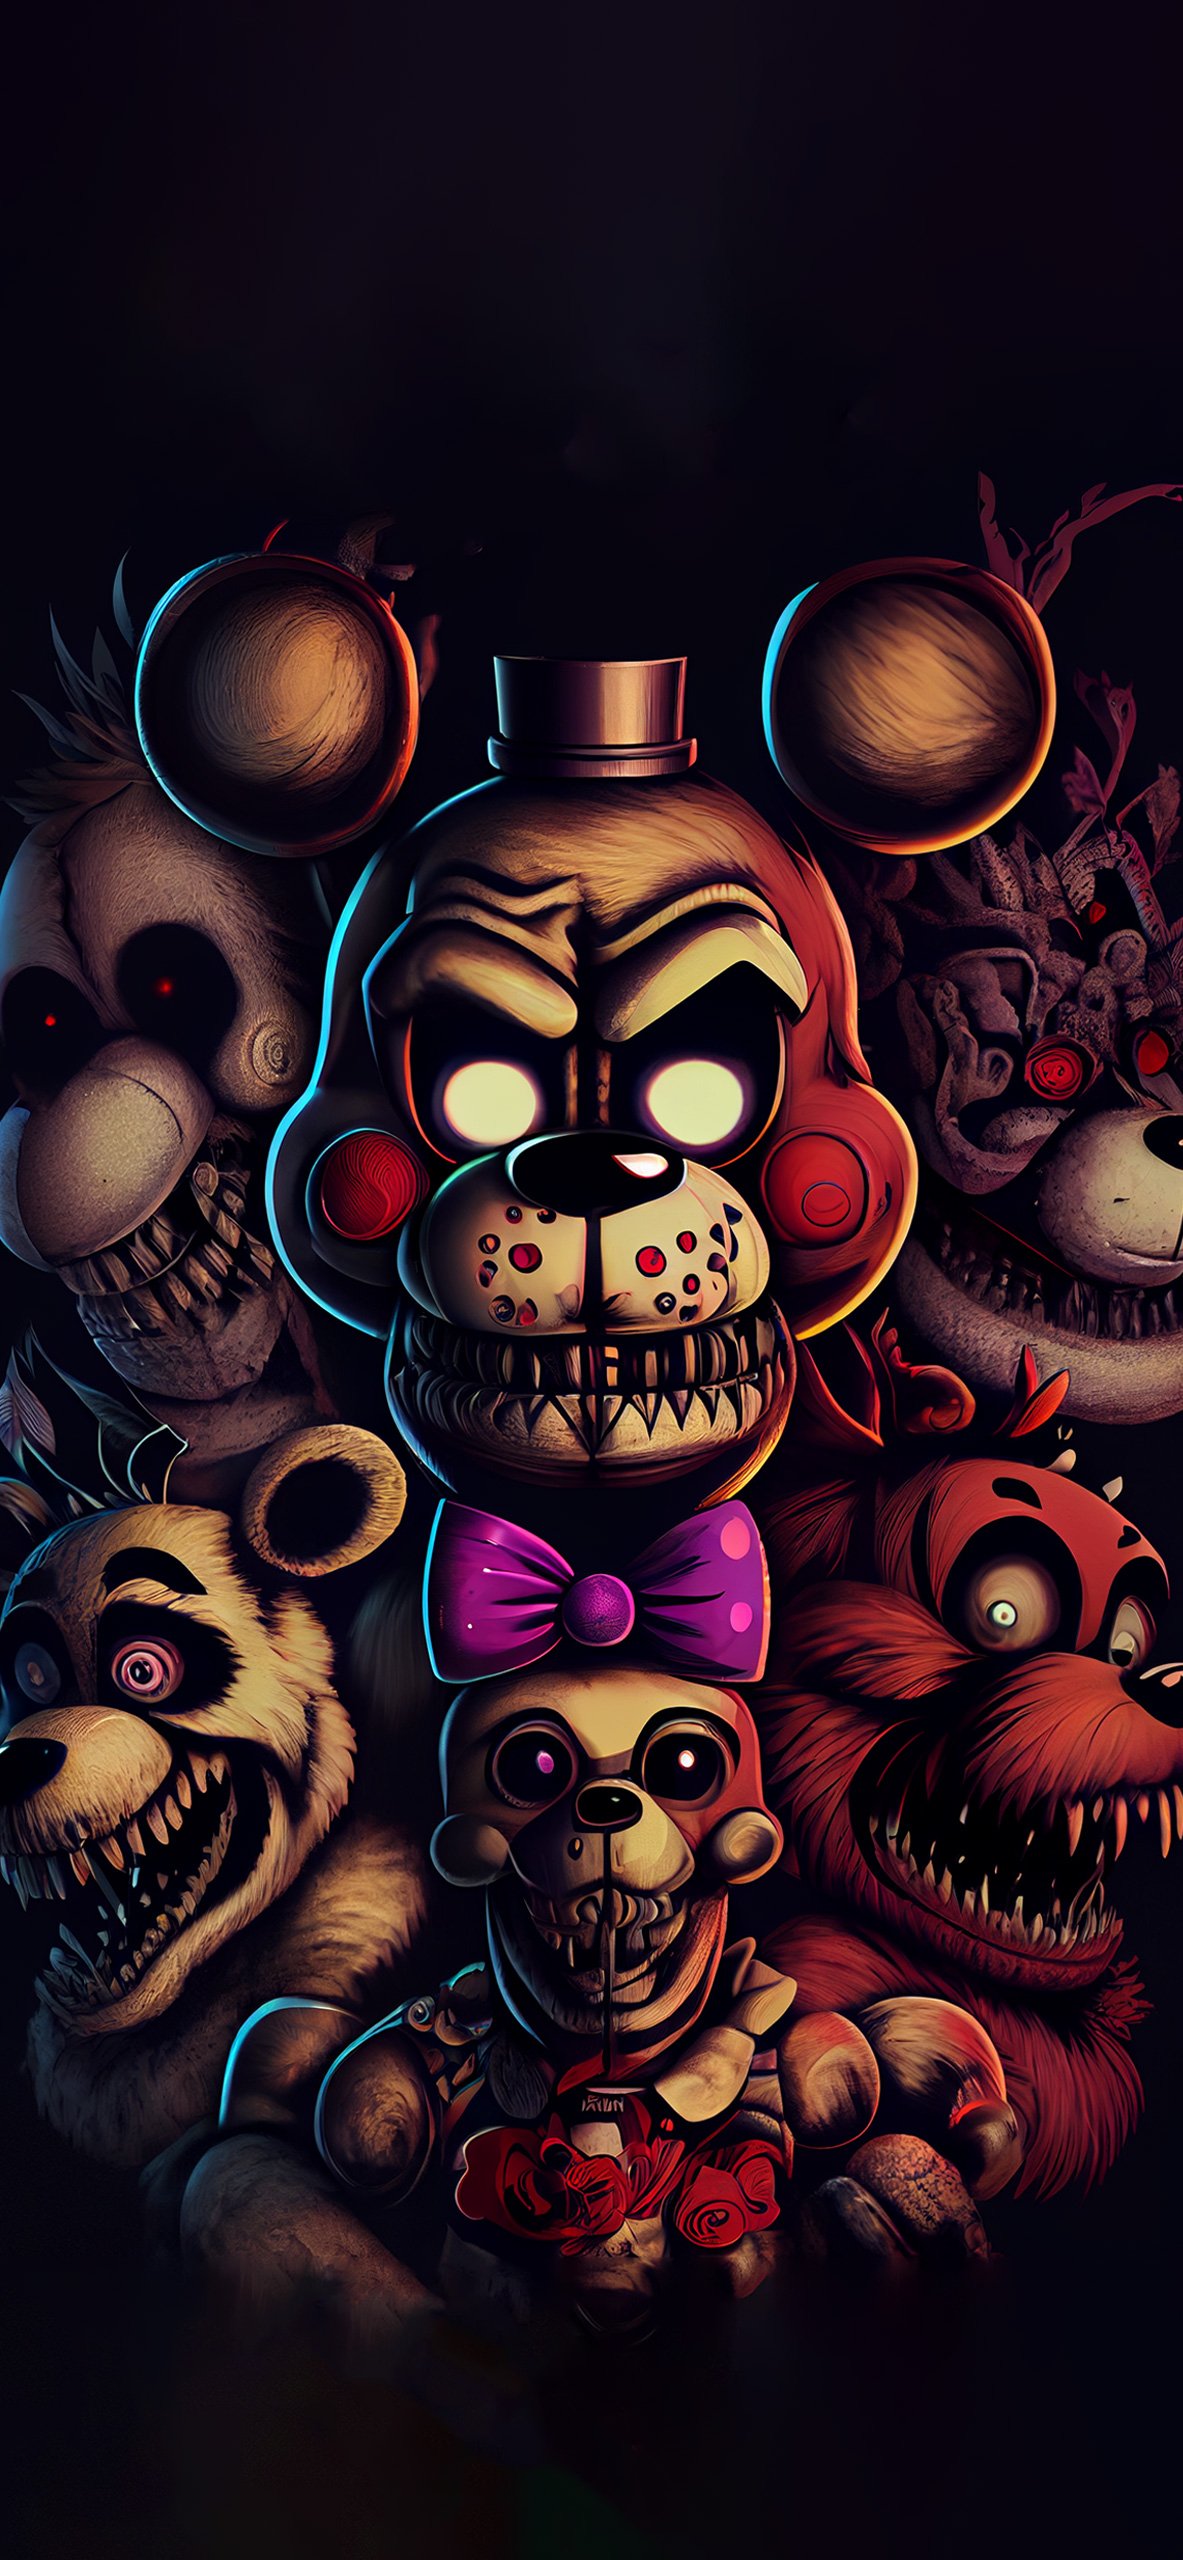 Fredbear is best animatronic  heres a somewhat aesthetic fnaf wallpaper  i